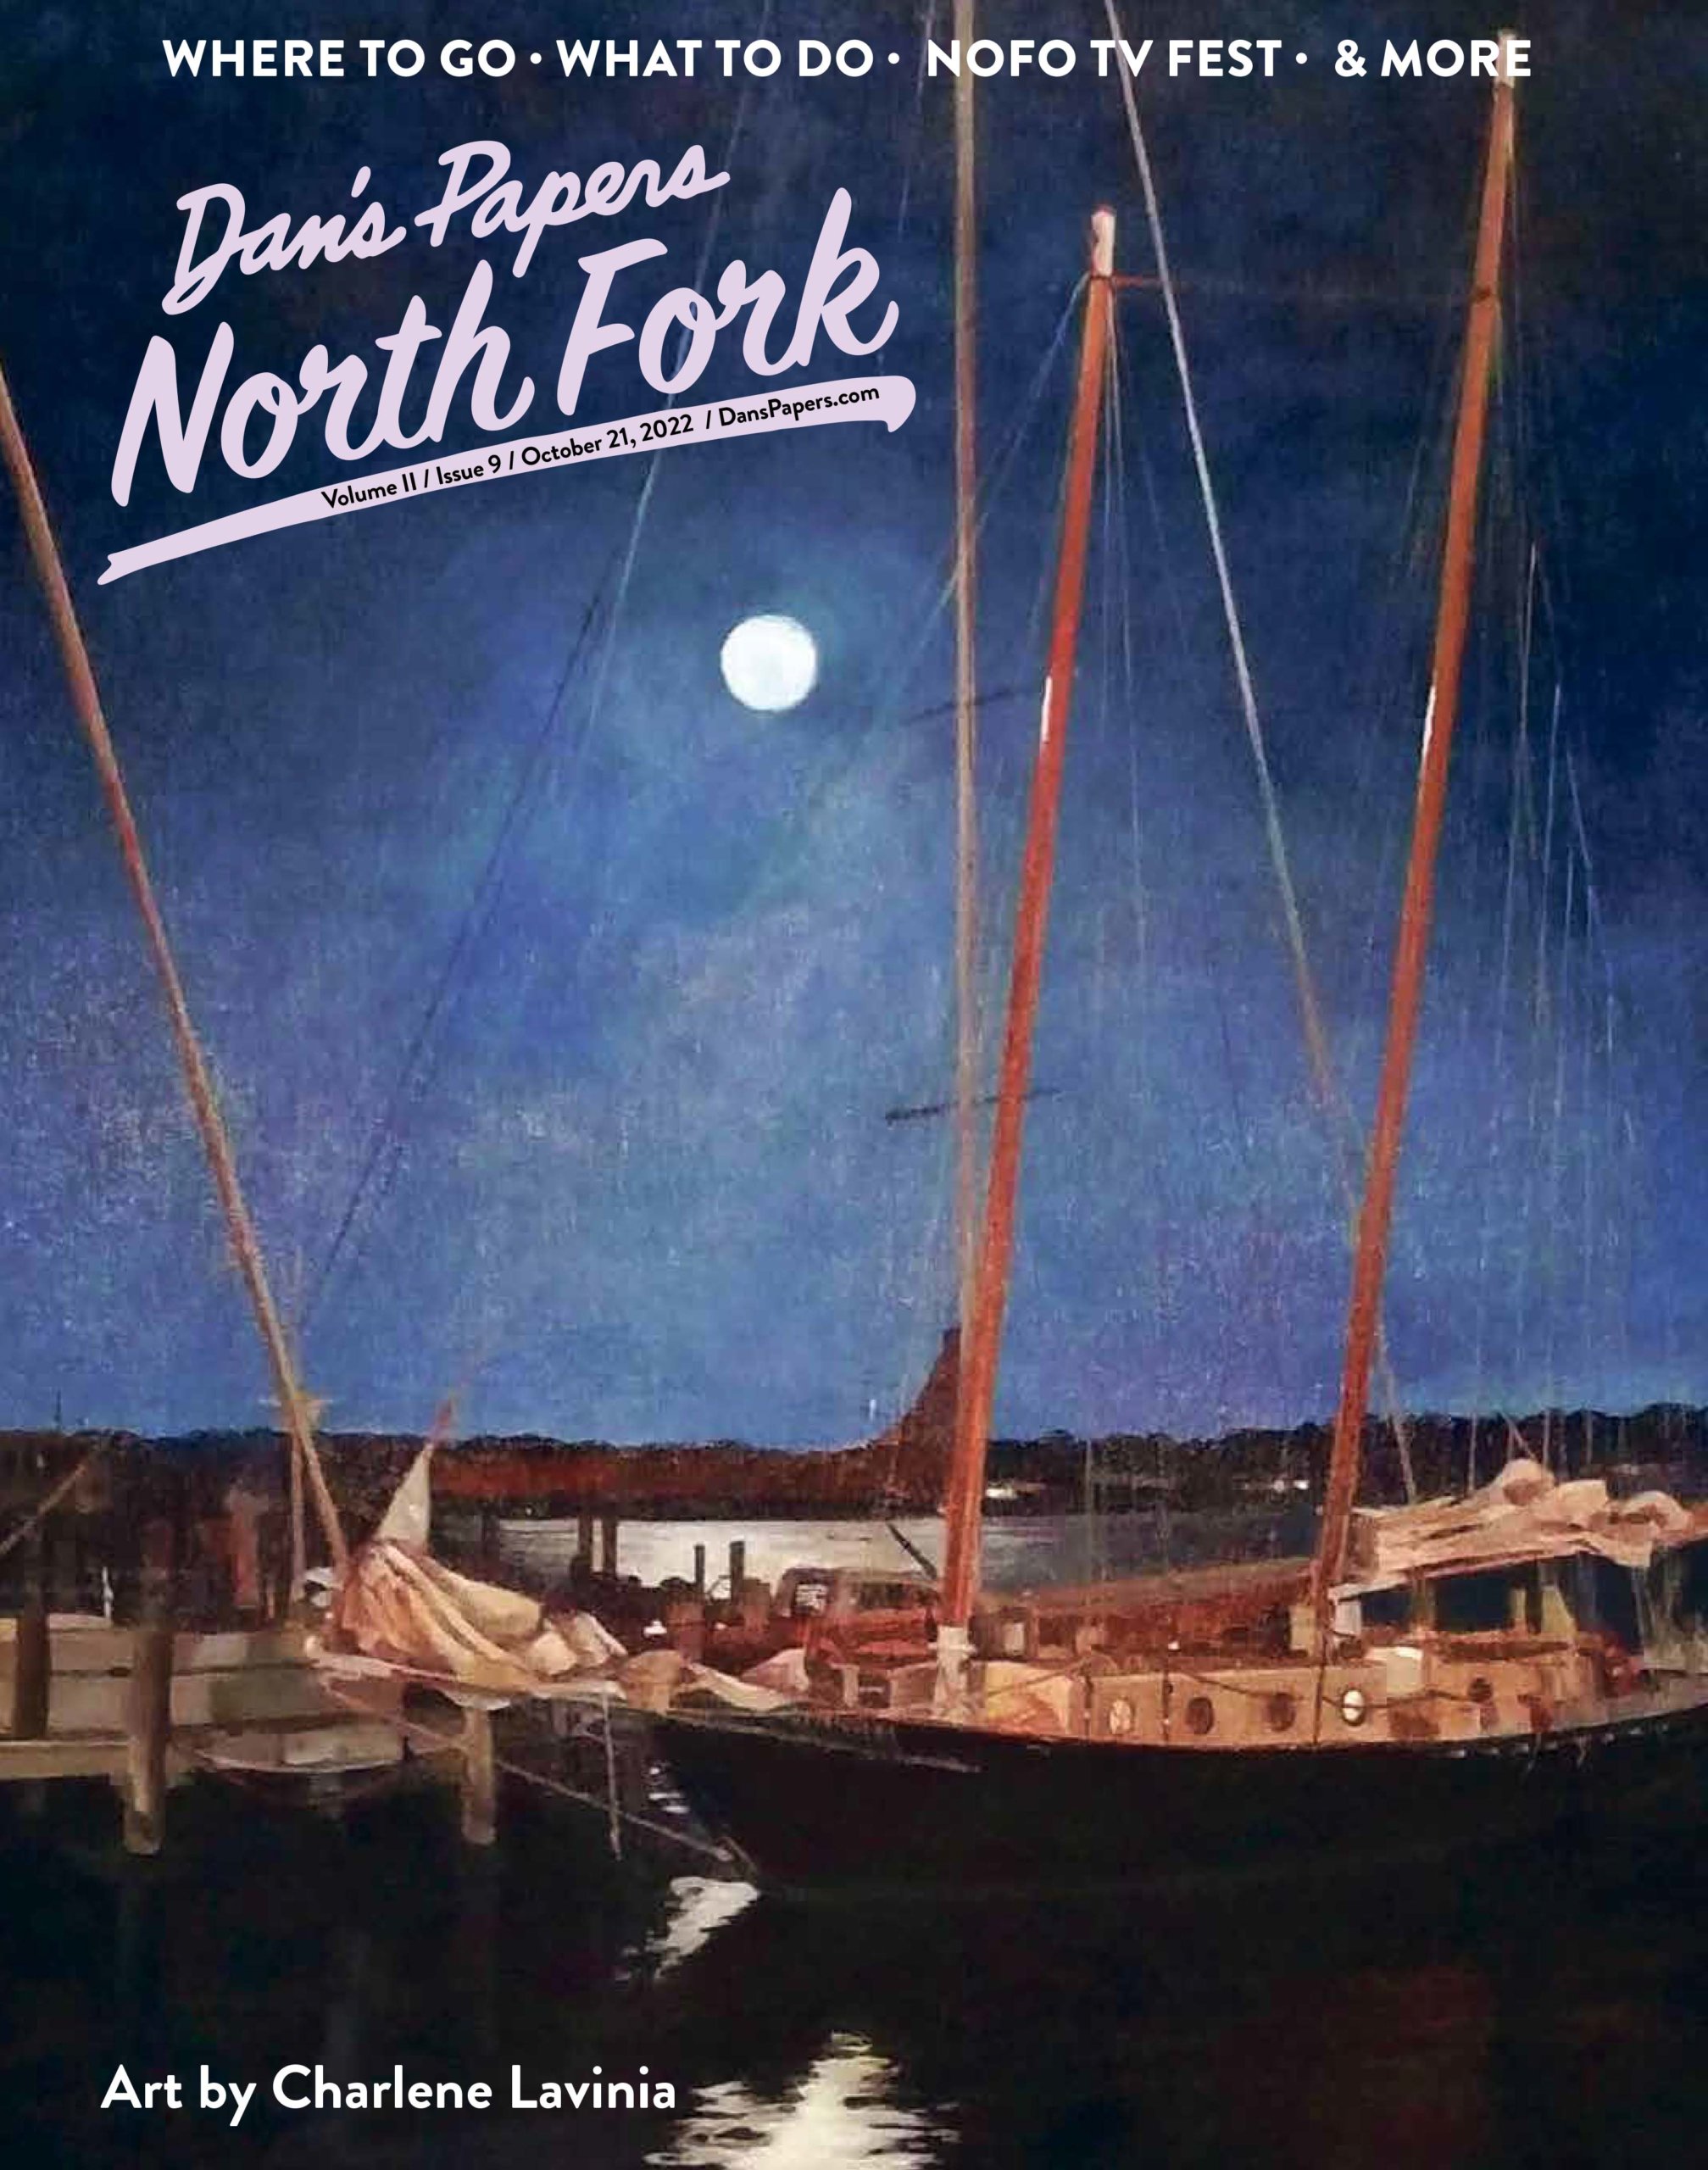 Dan's Papers North Fork October 21, 2022 Issue with cover by Charlene Lavinia